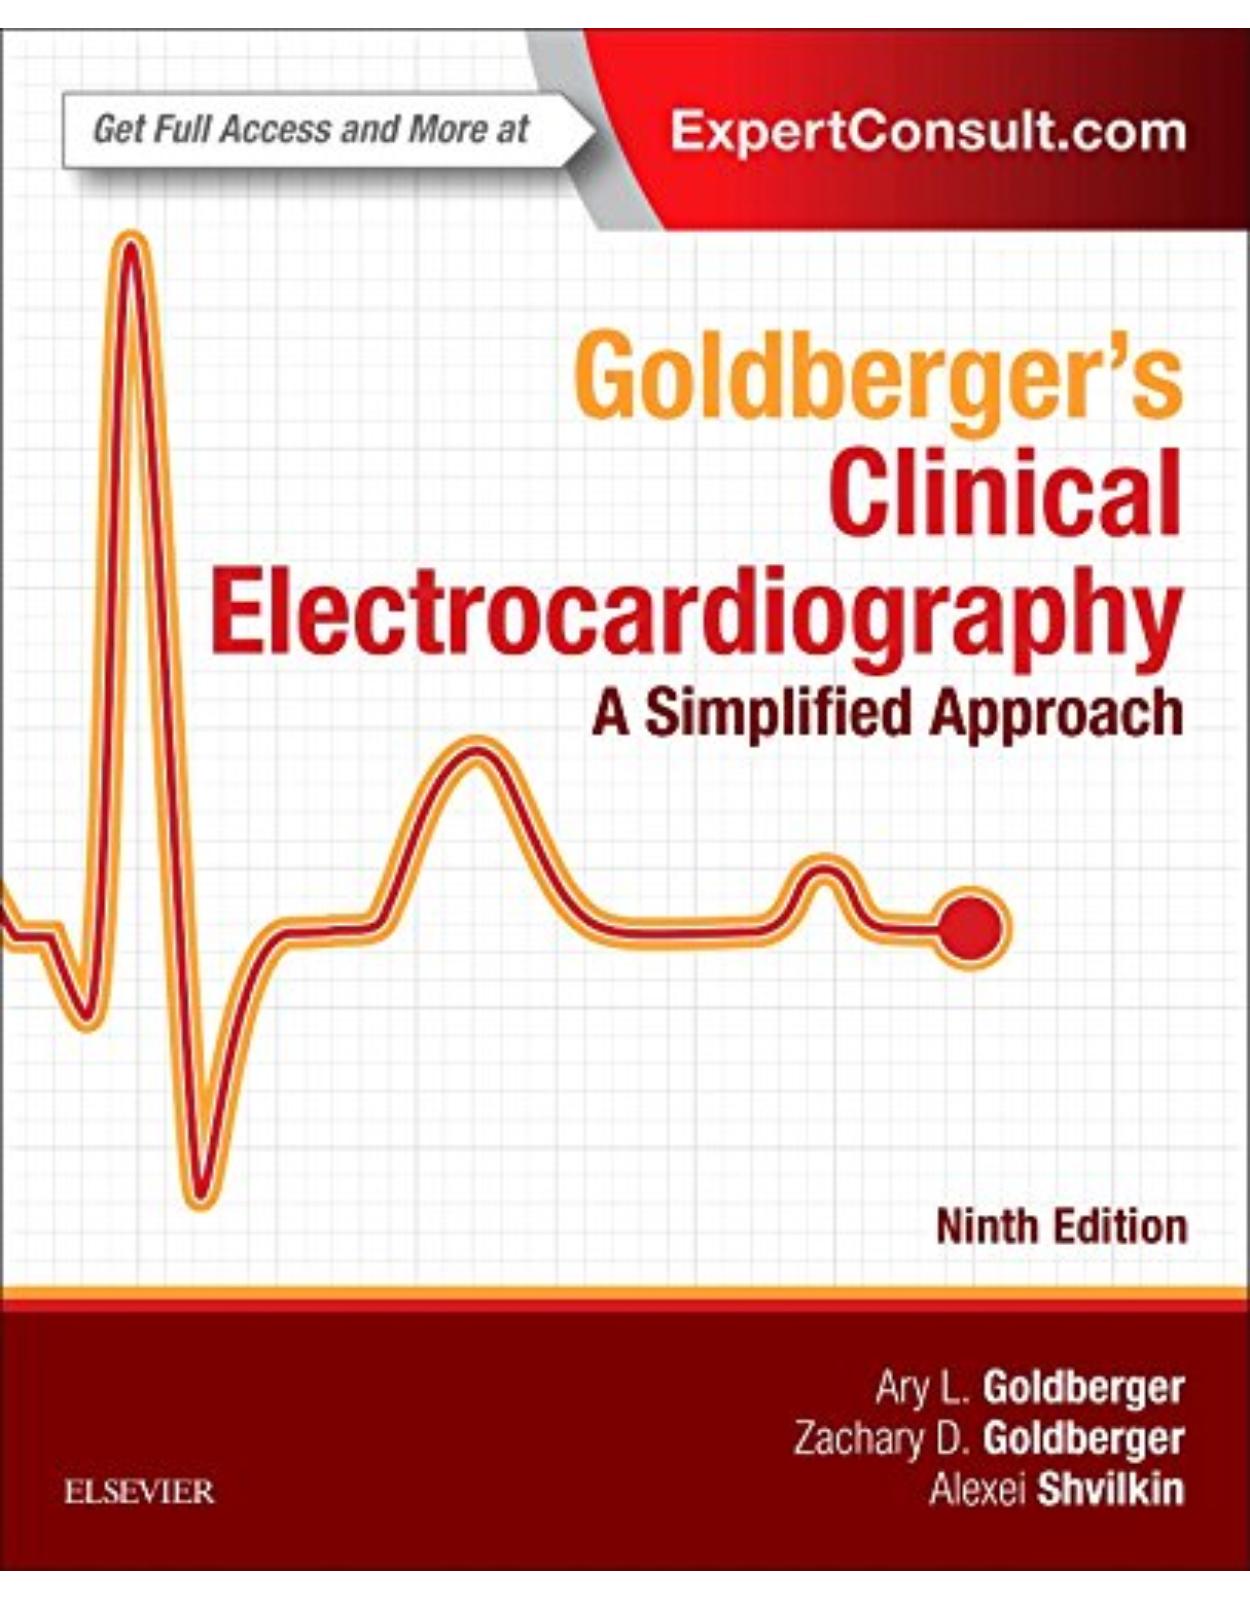 Goldberger's Clinical Electrocardiography, 9th Edition